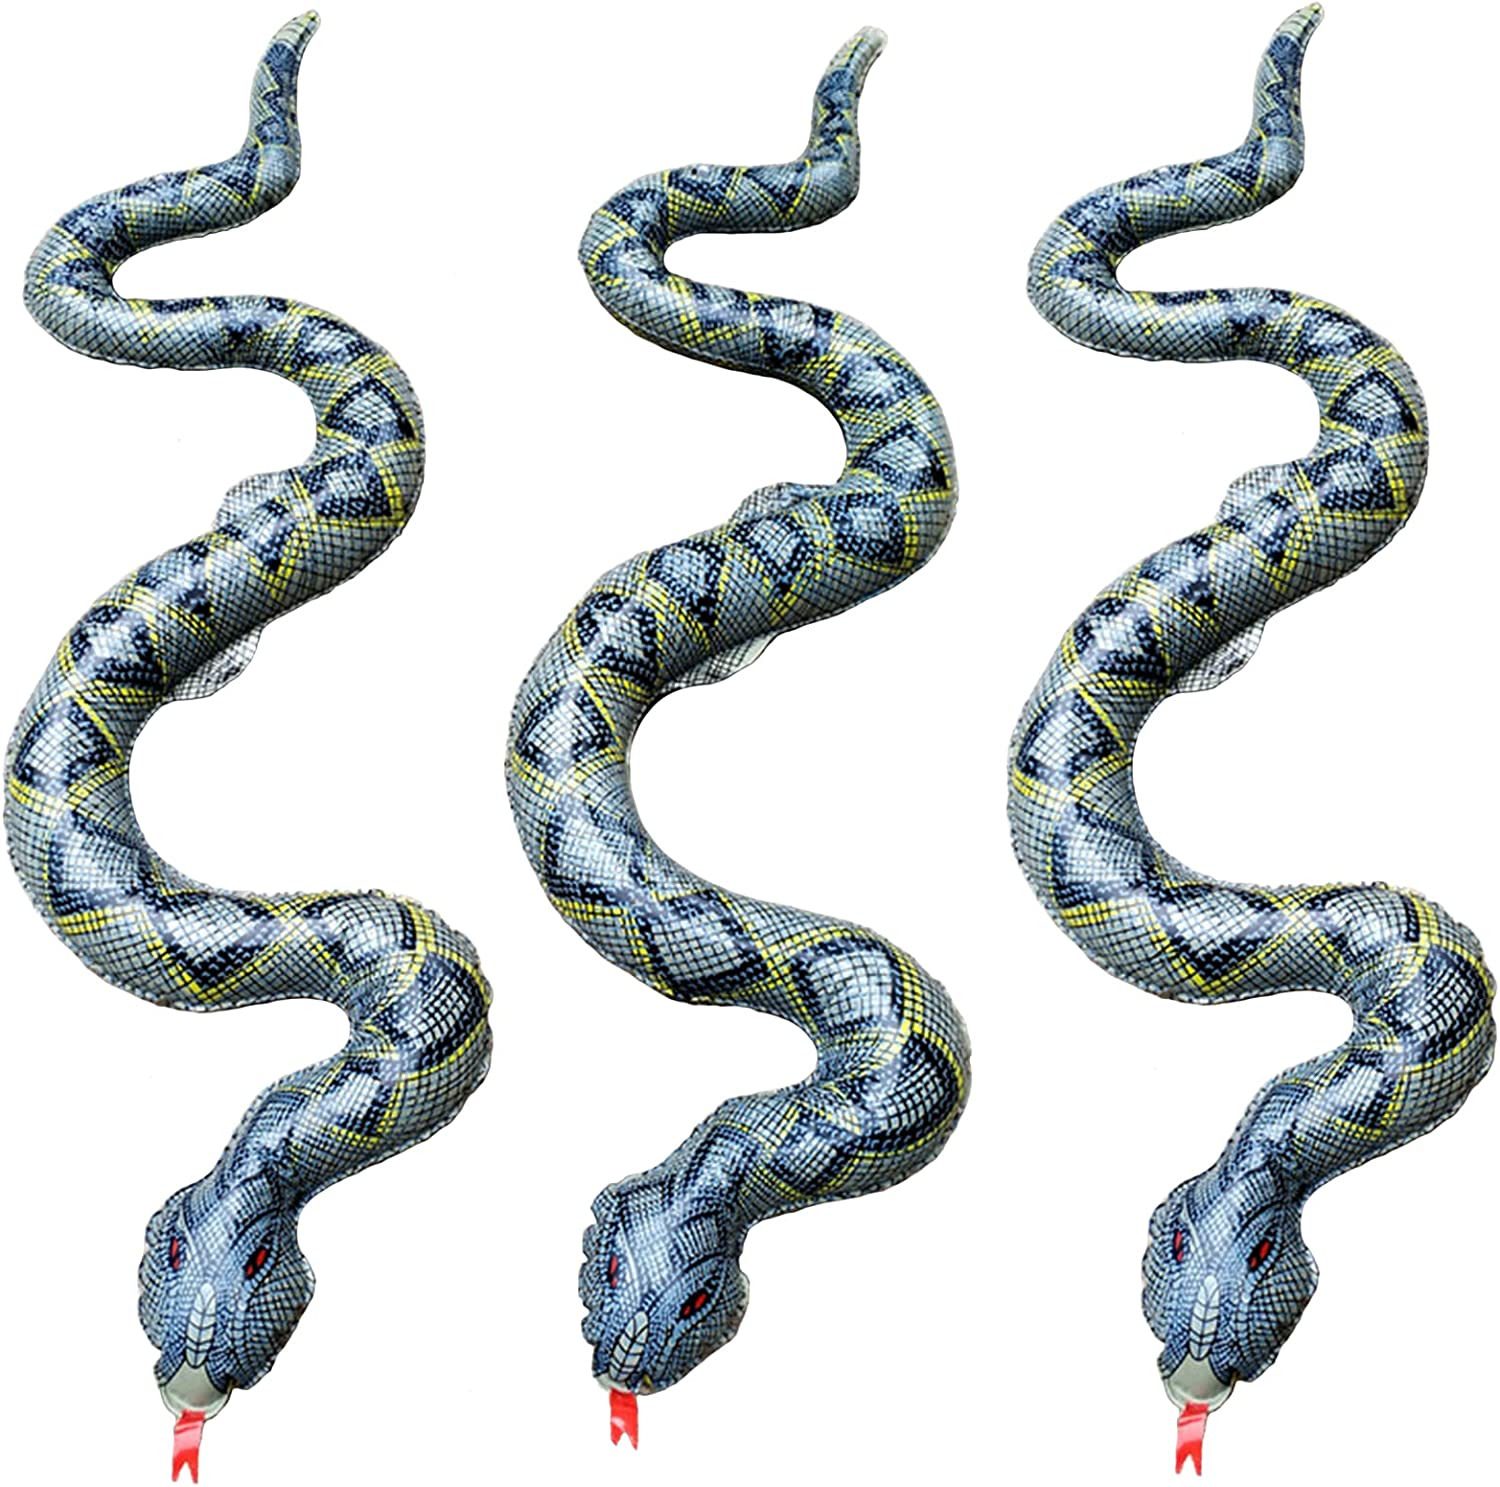 Inflatable Snake,3 Pack Fake Snakes 37.4 Inch Large Inflatable Snakes for Garden